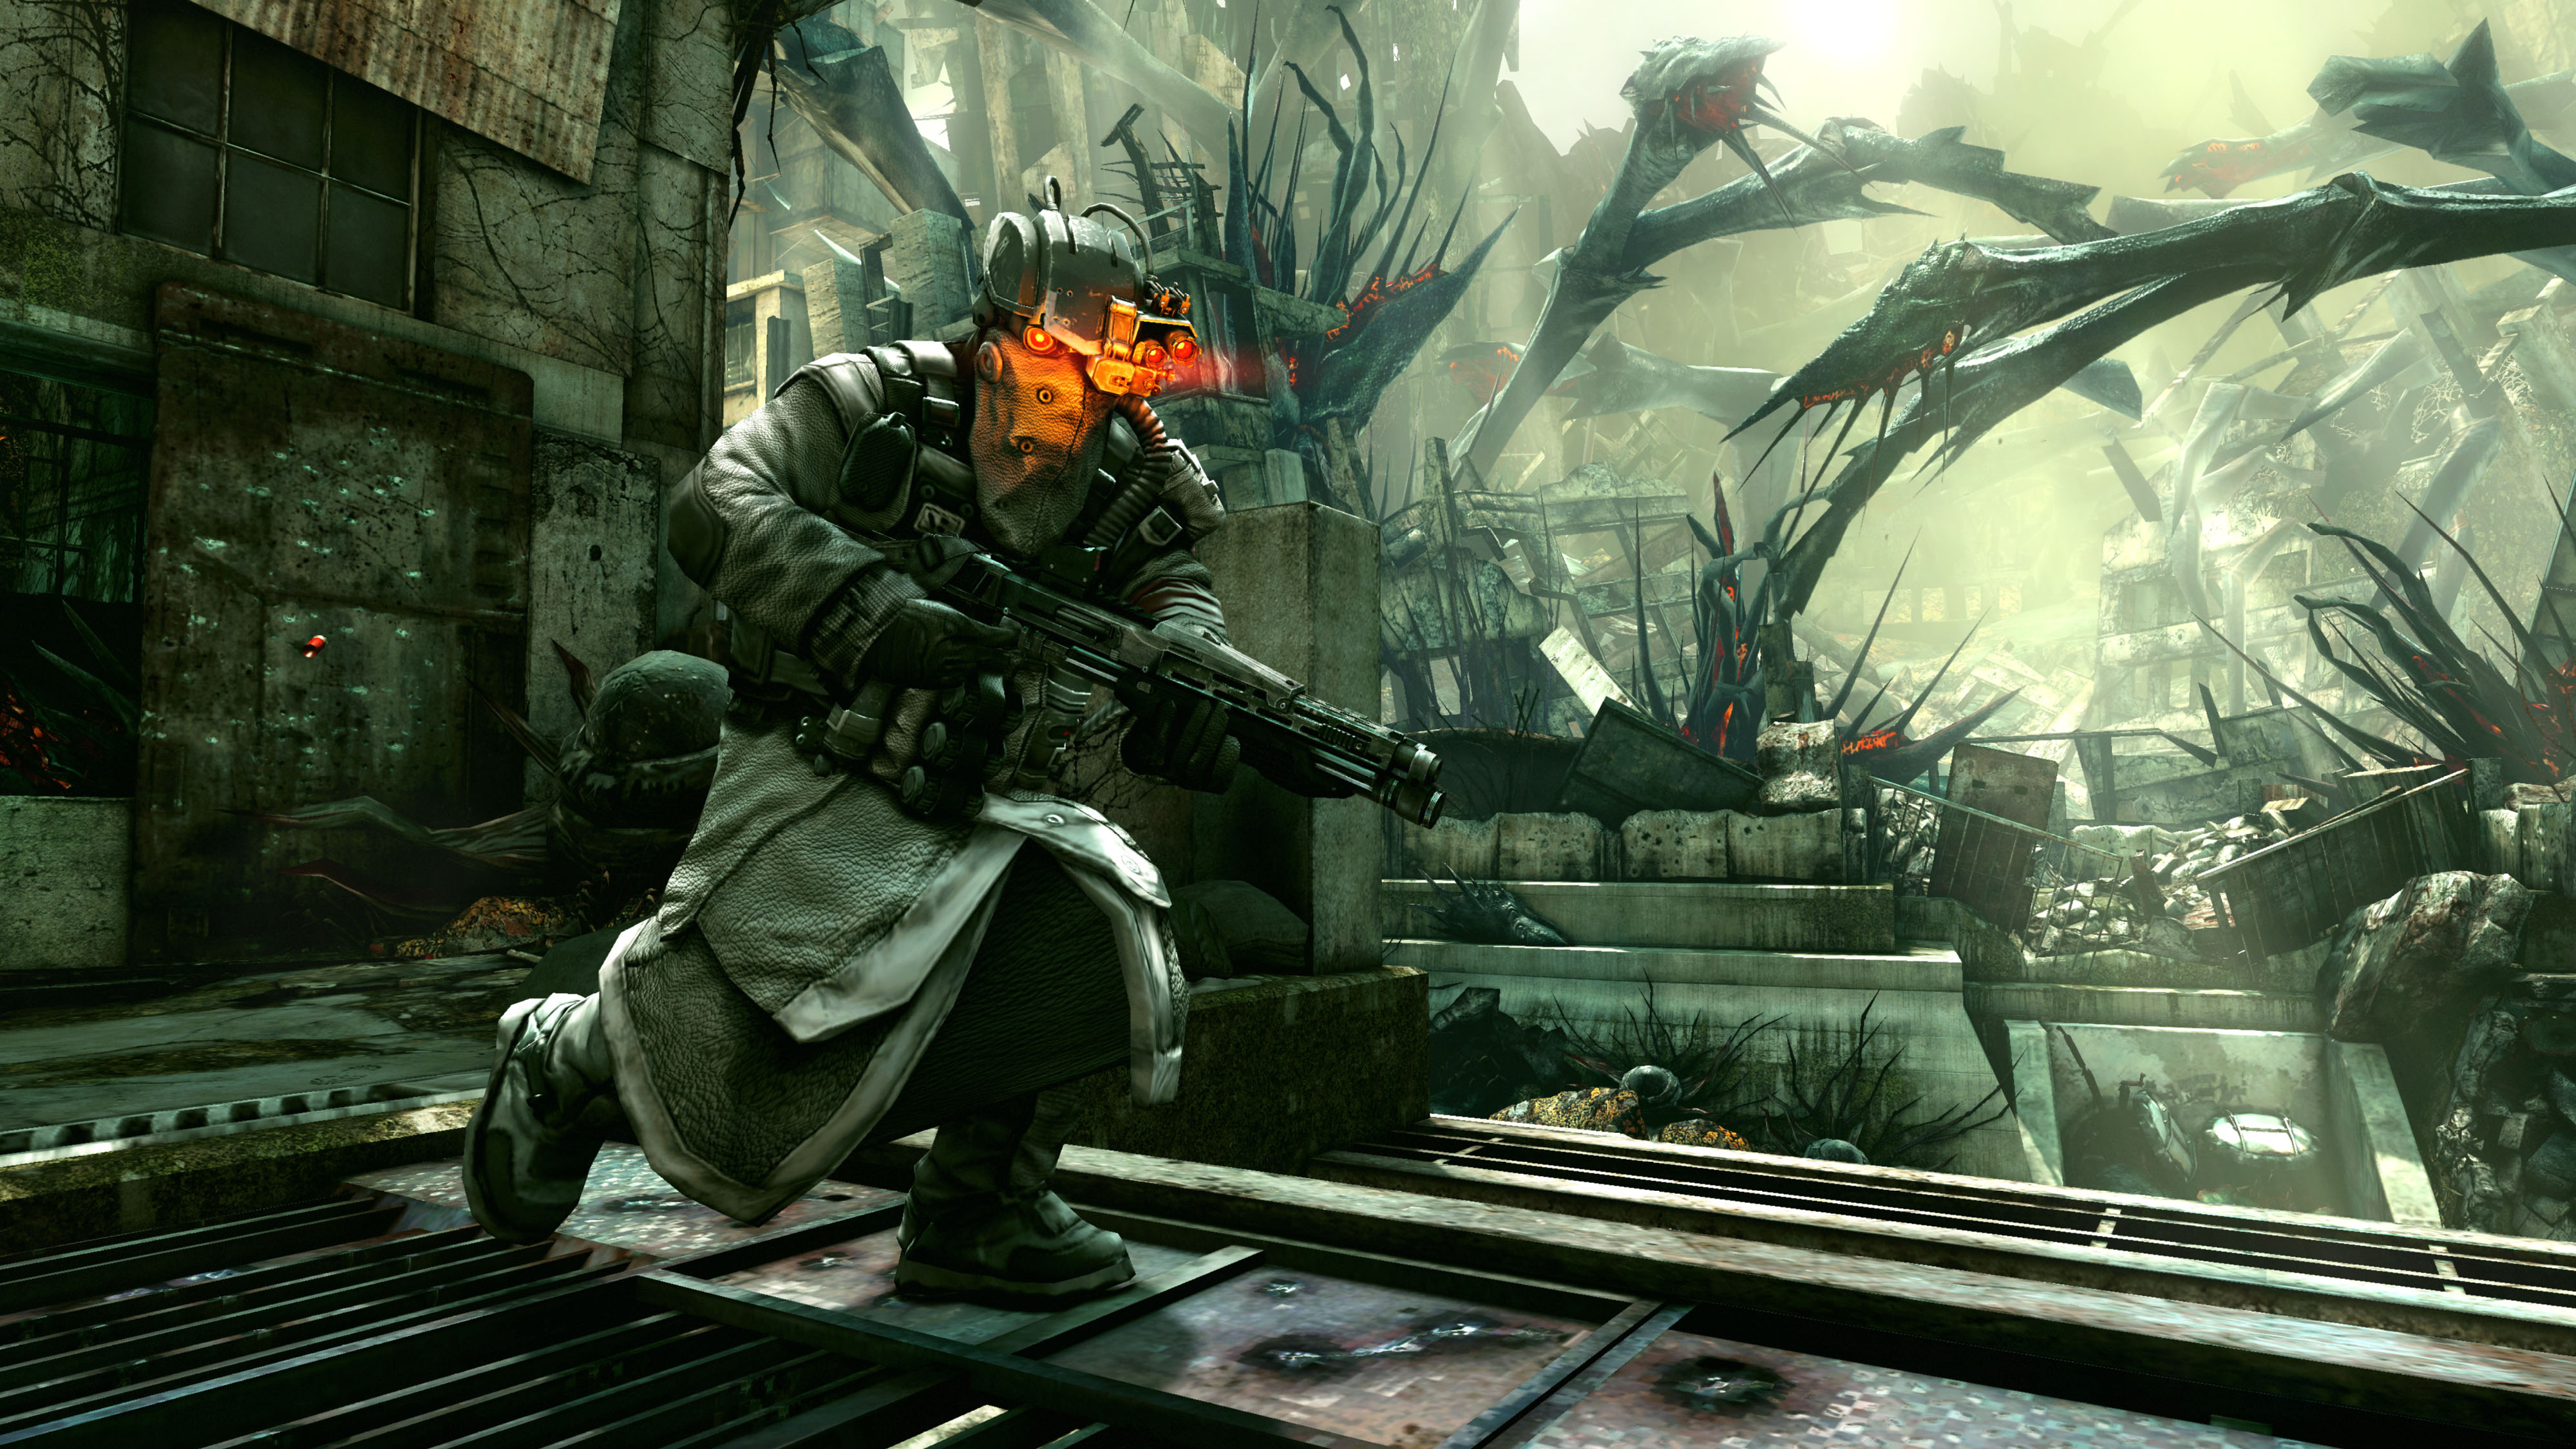 Killzone 3 is Now Playable on PC With Mouse and Keyboard